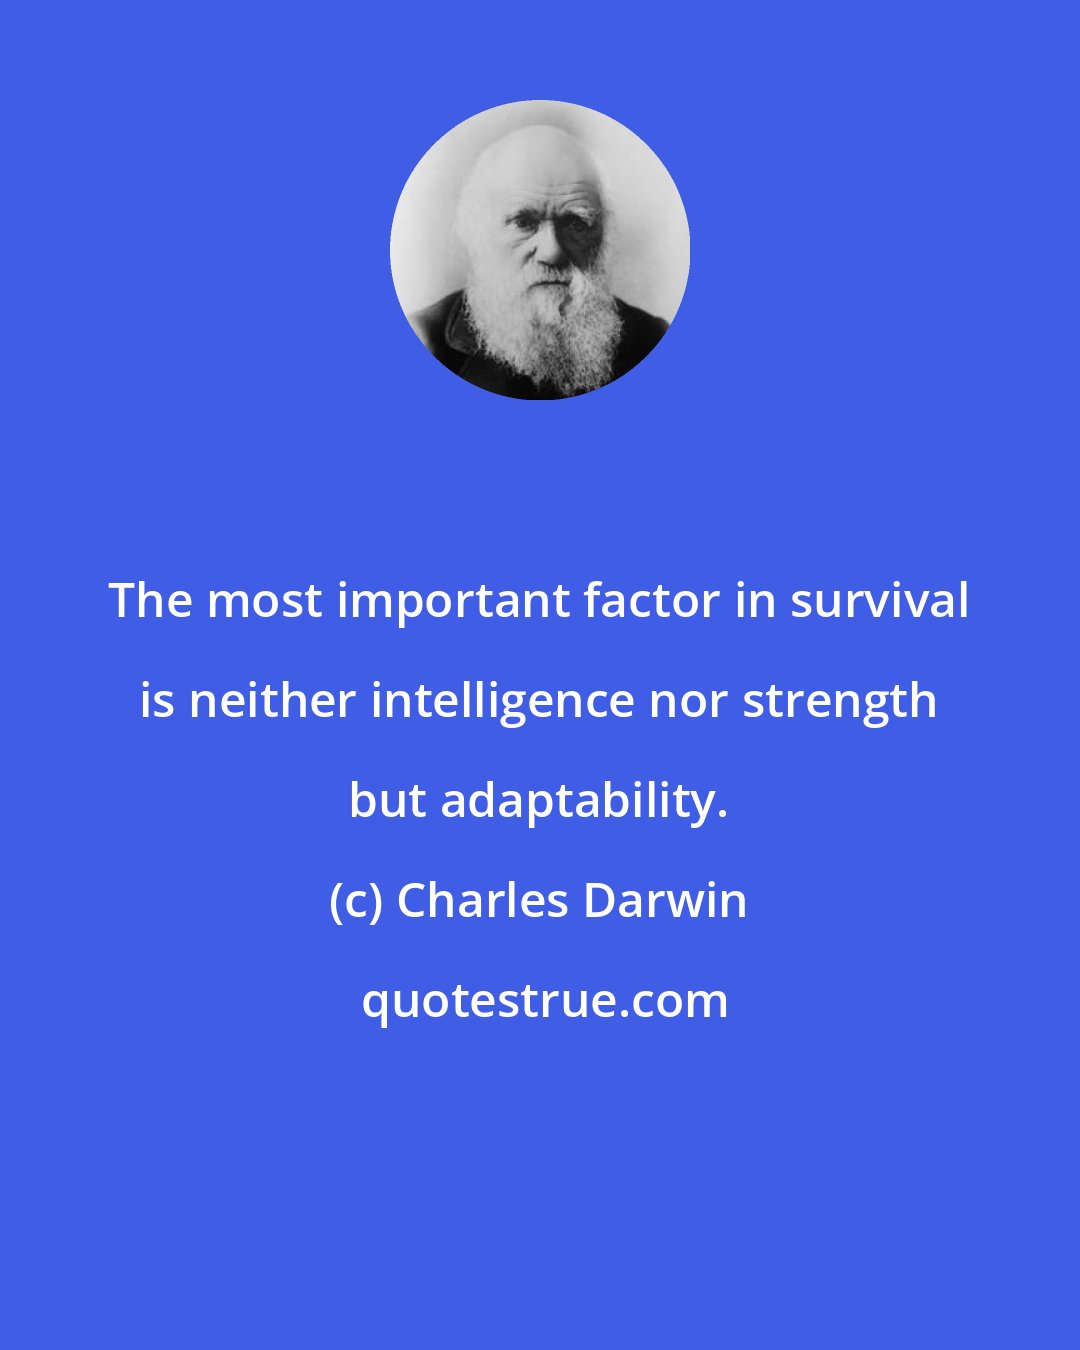 Charles Darwin: The most important factor in survival is neither intelligence nor strength but adaptability.